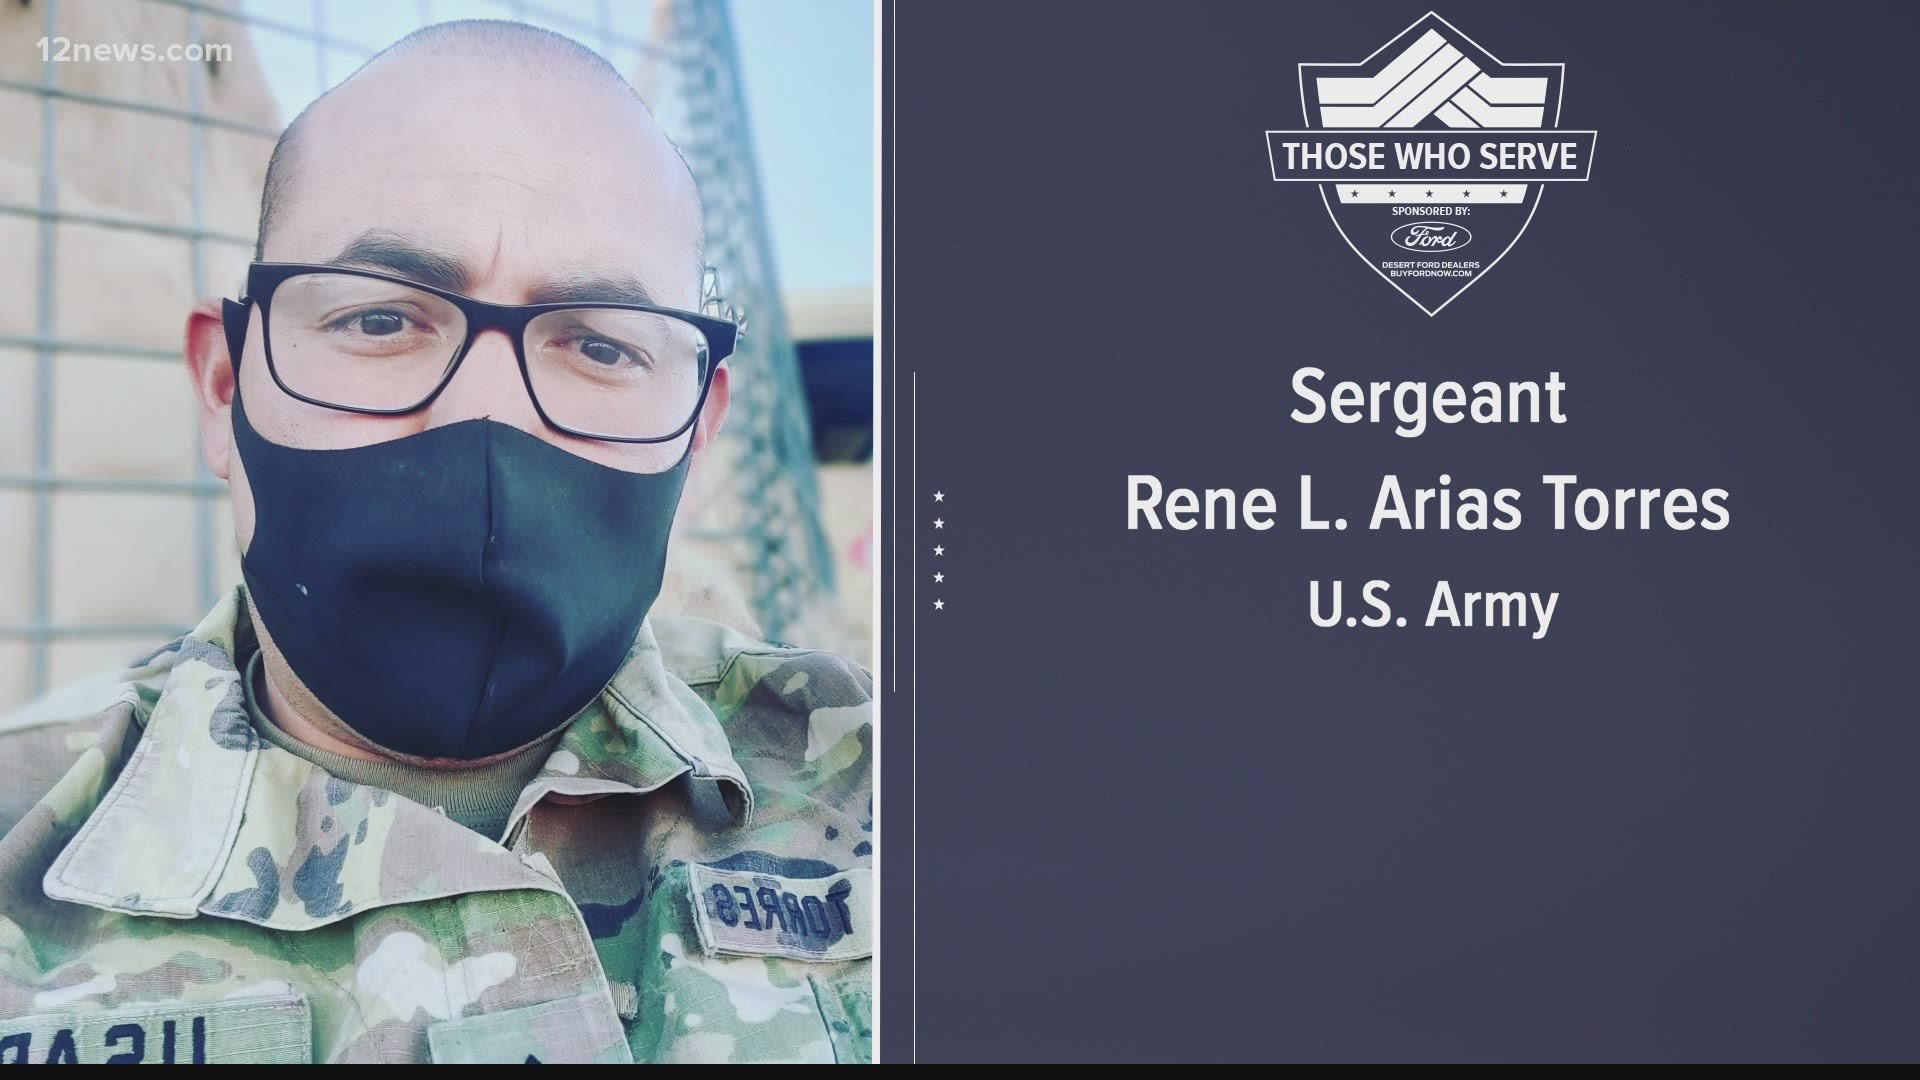 12 News is honoring Those Who Serve. This is Sergeant Rene L. Arias who is serving proudly in the U.S. Army.